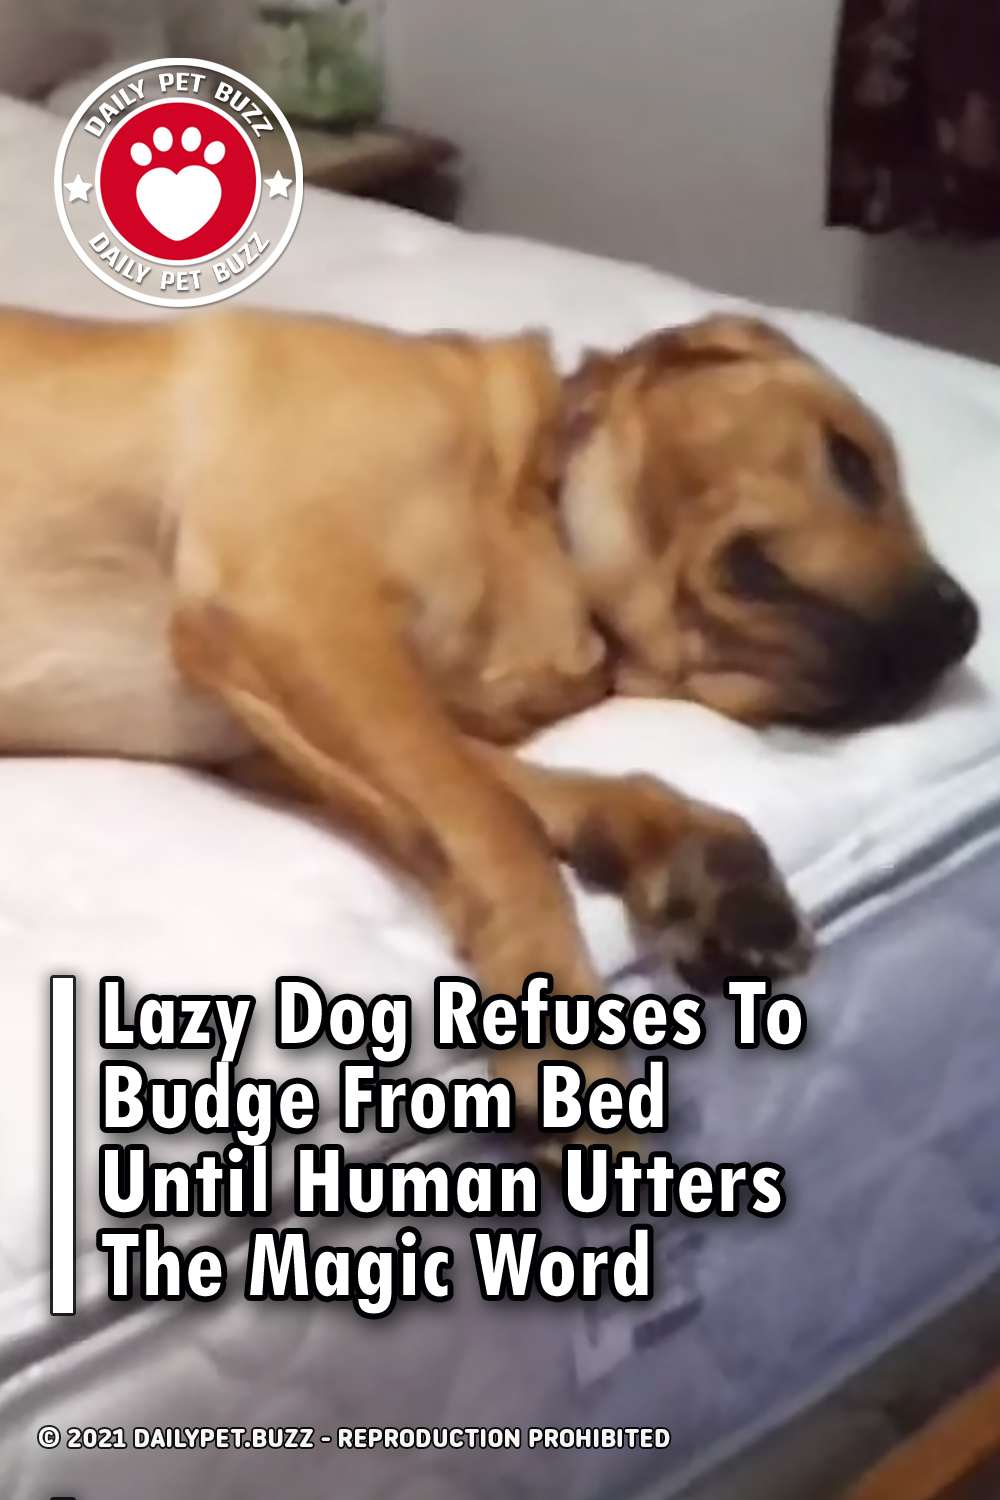 Lazy Dog Refuses To Budge From Bed Until Human Utters The Magic Word